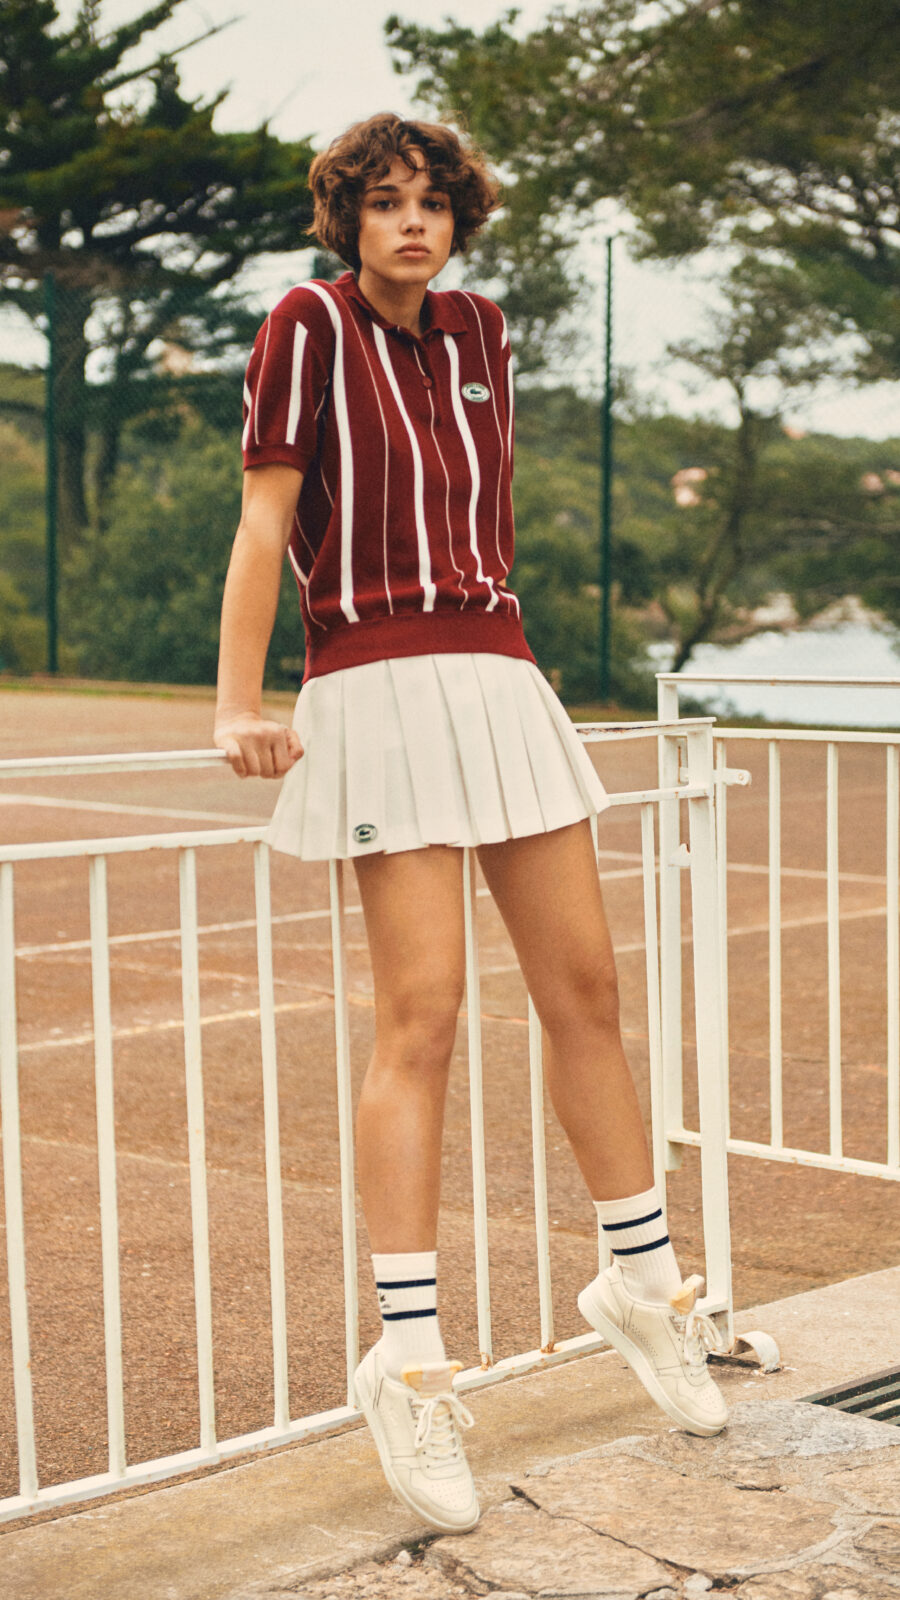 ingen forbindelse mineral Fælles valg LACOSTE AND SPORTY & RICH UNITE FOR RIVIERA-INSPIRED TENNIS COLLECTION. -  CRASH Magazine